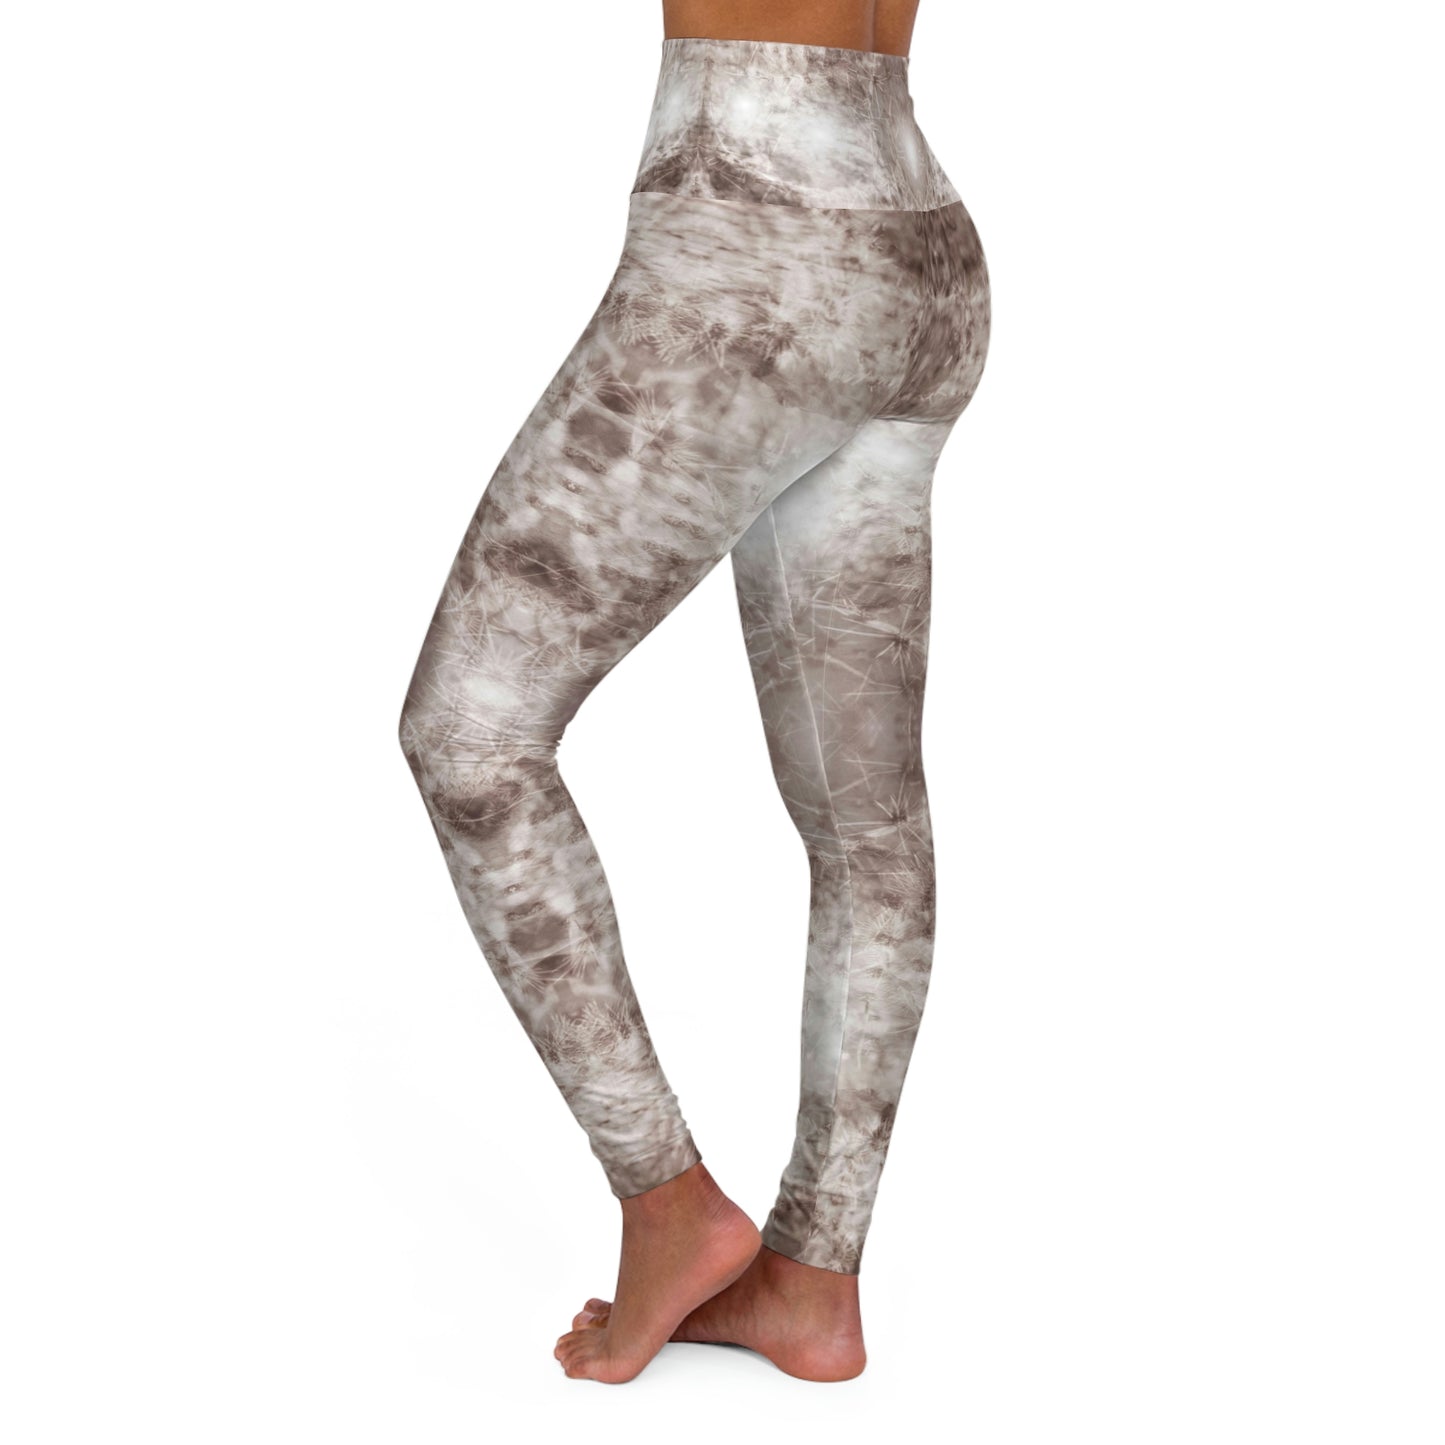 Cacti Connection High Waisted Yoga Leggings in color Dust